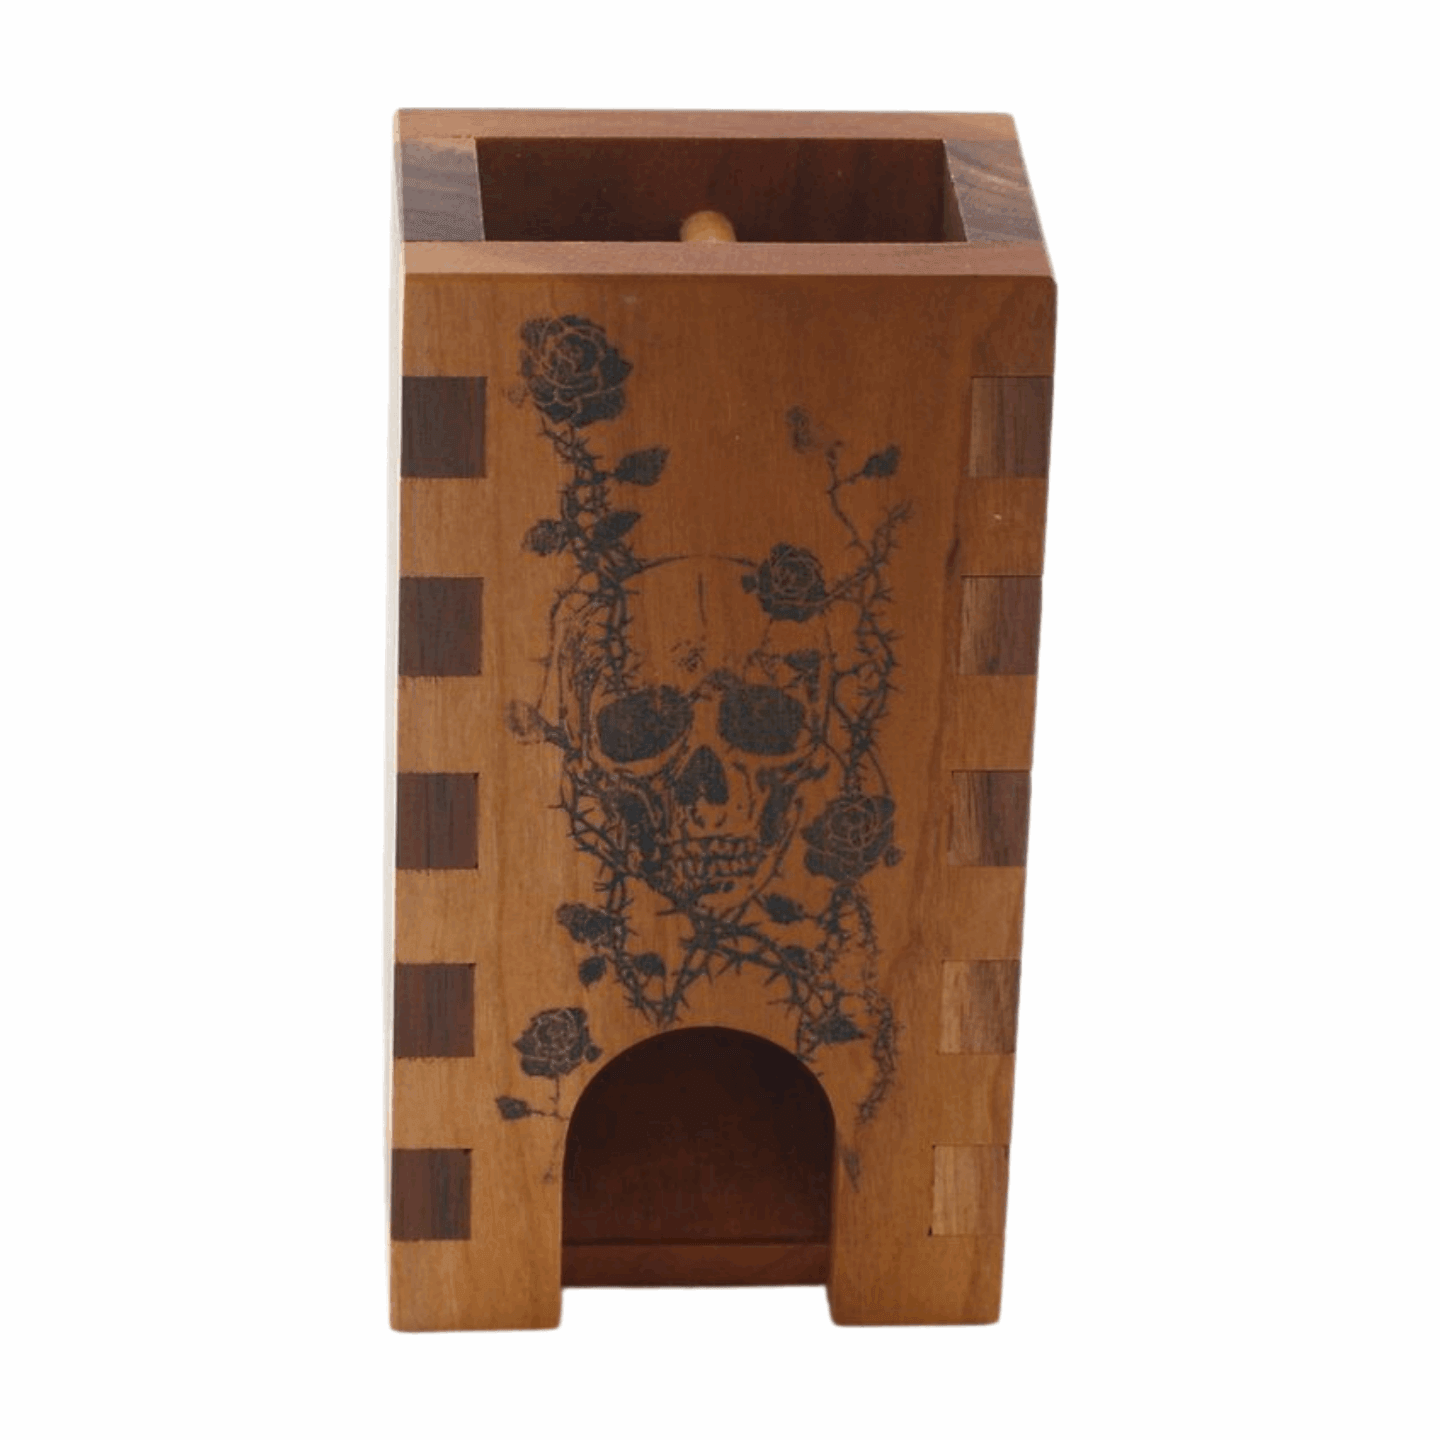 Small Cherry and Walnut Box Joint Dice Tower with Skull and Roses - Dragon Armor Games